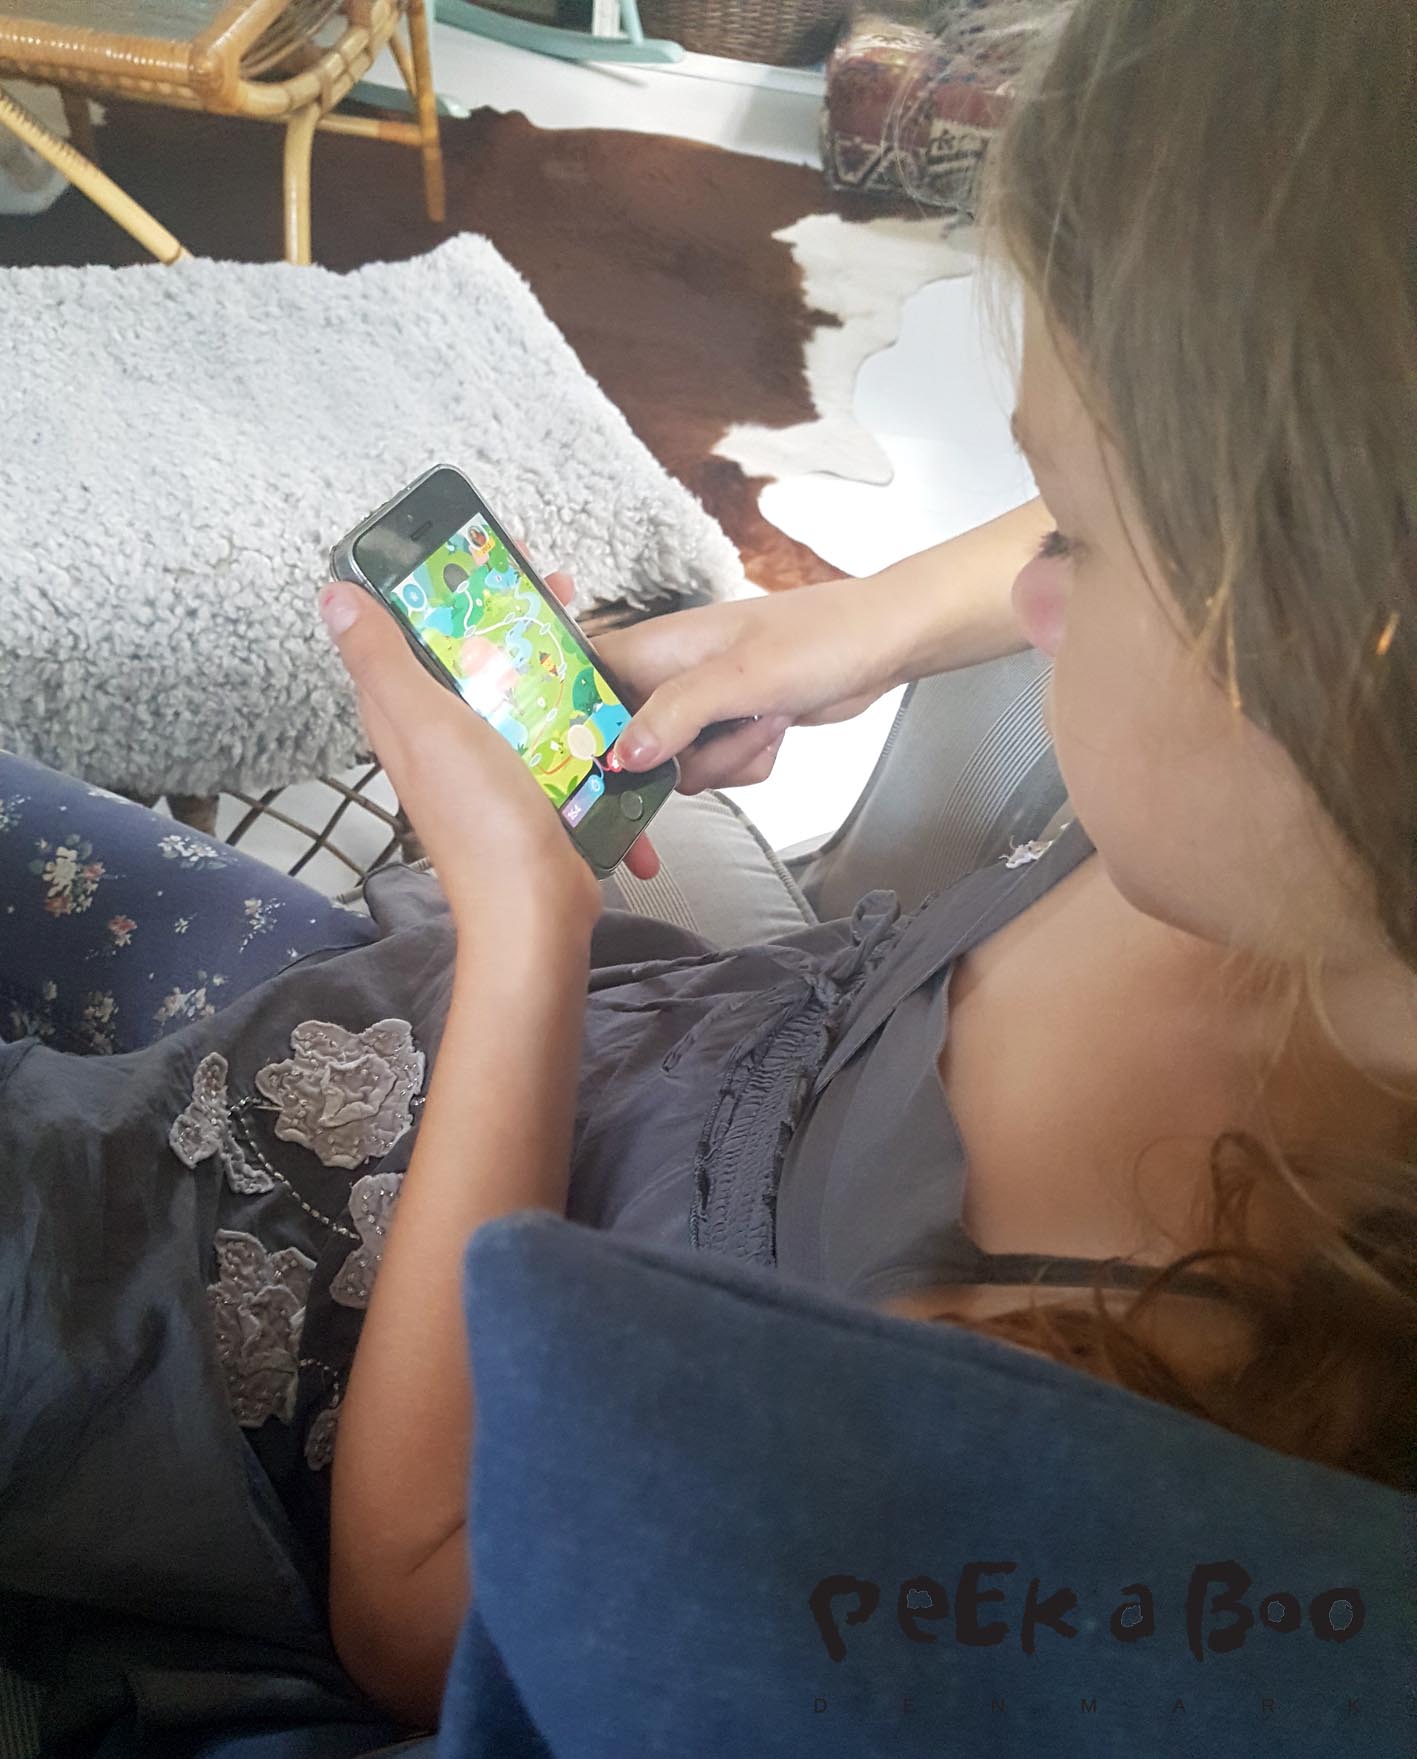 Flora is checking how far she can go in her ReimaGo app. after being active.